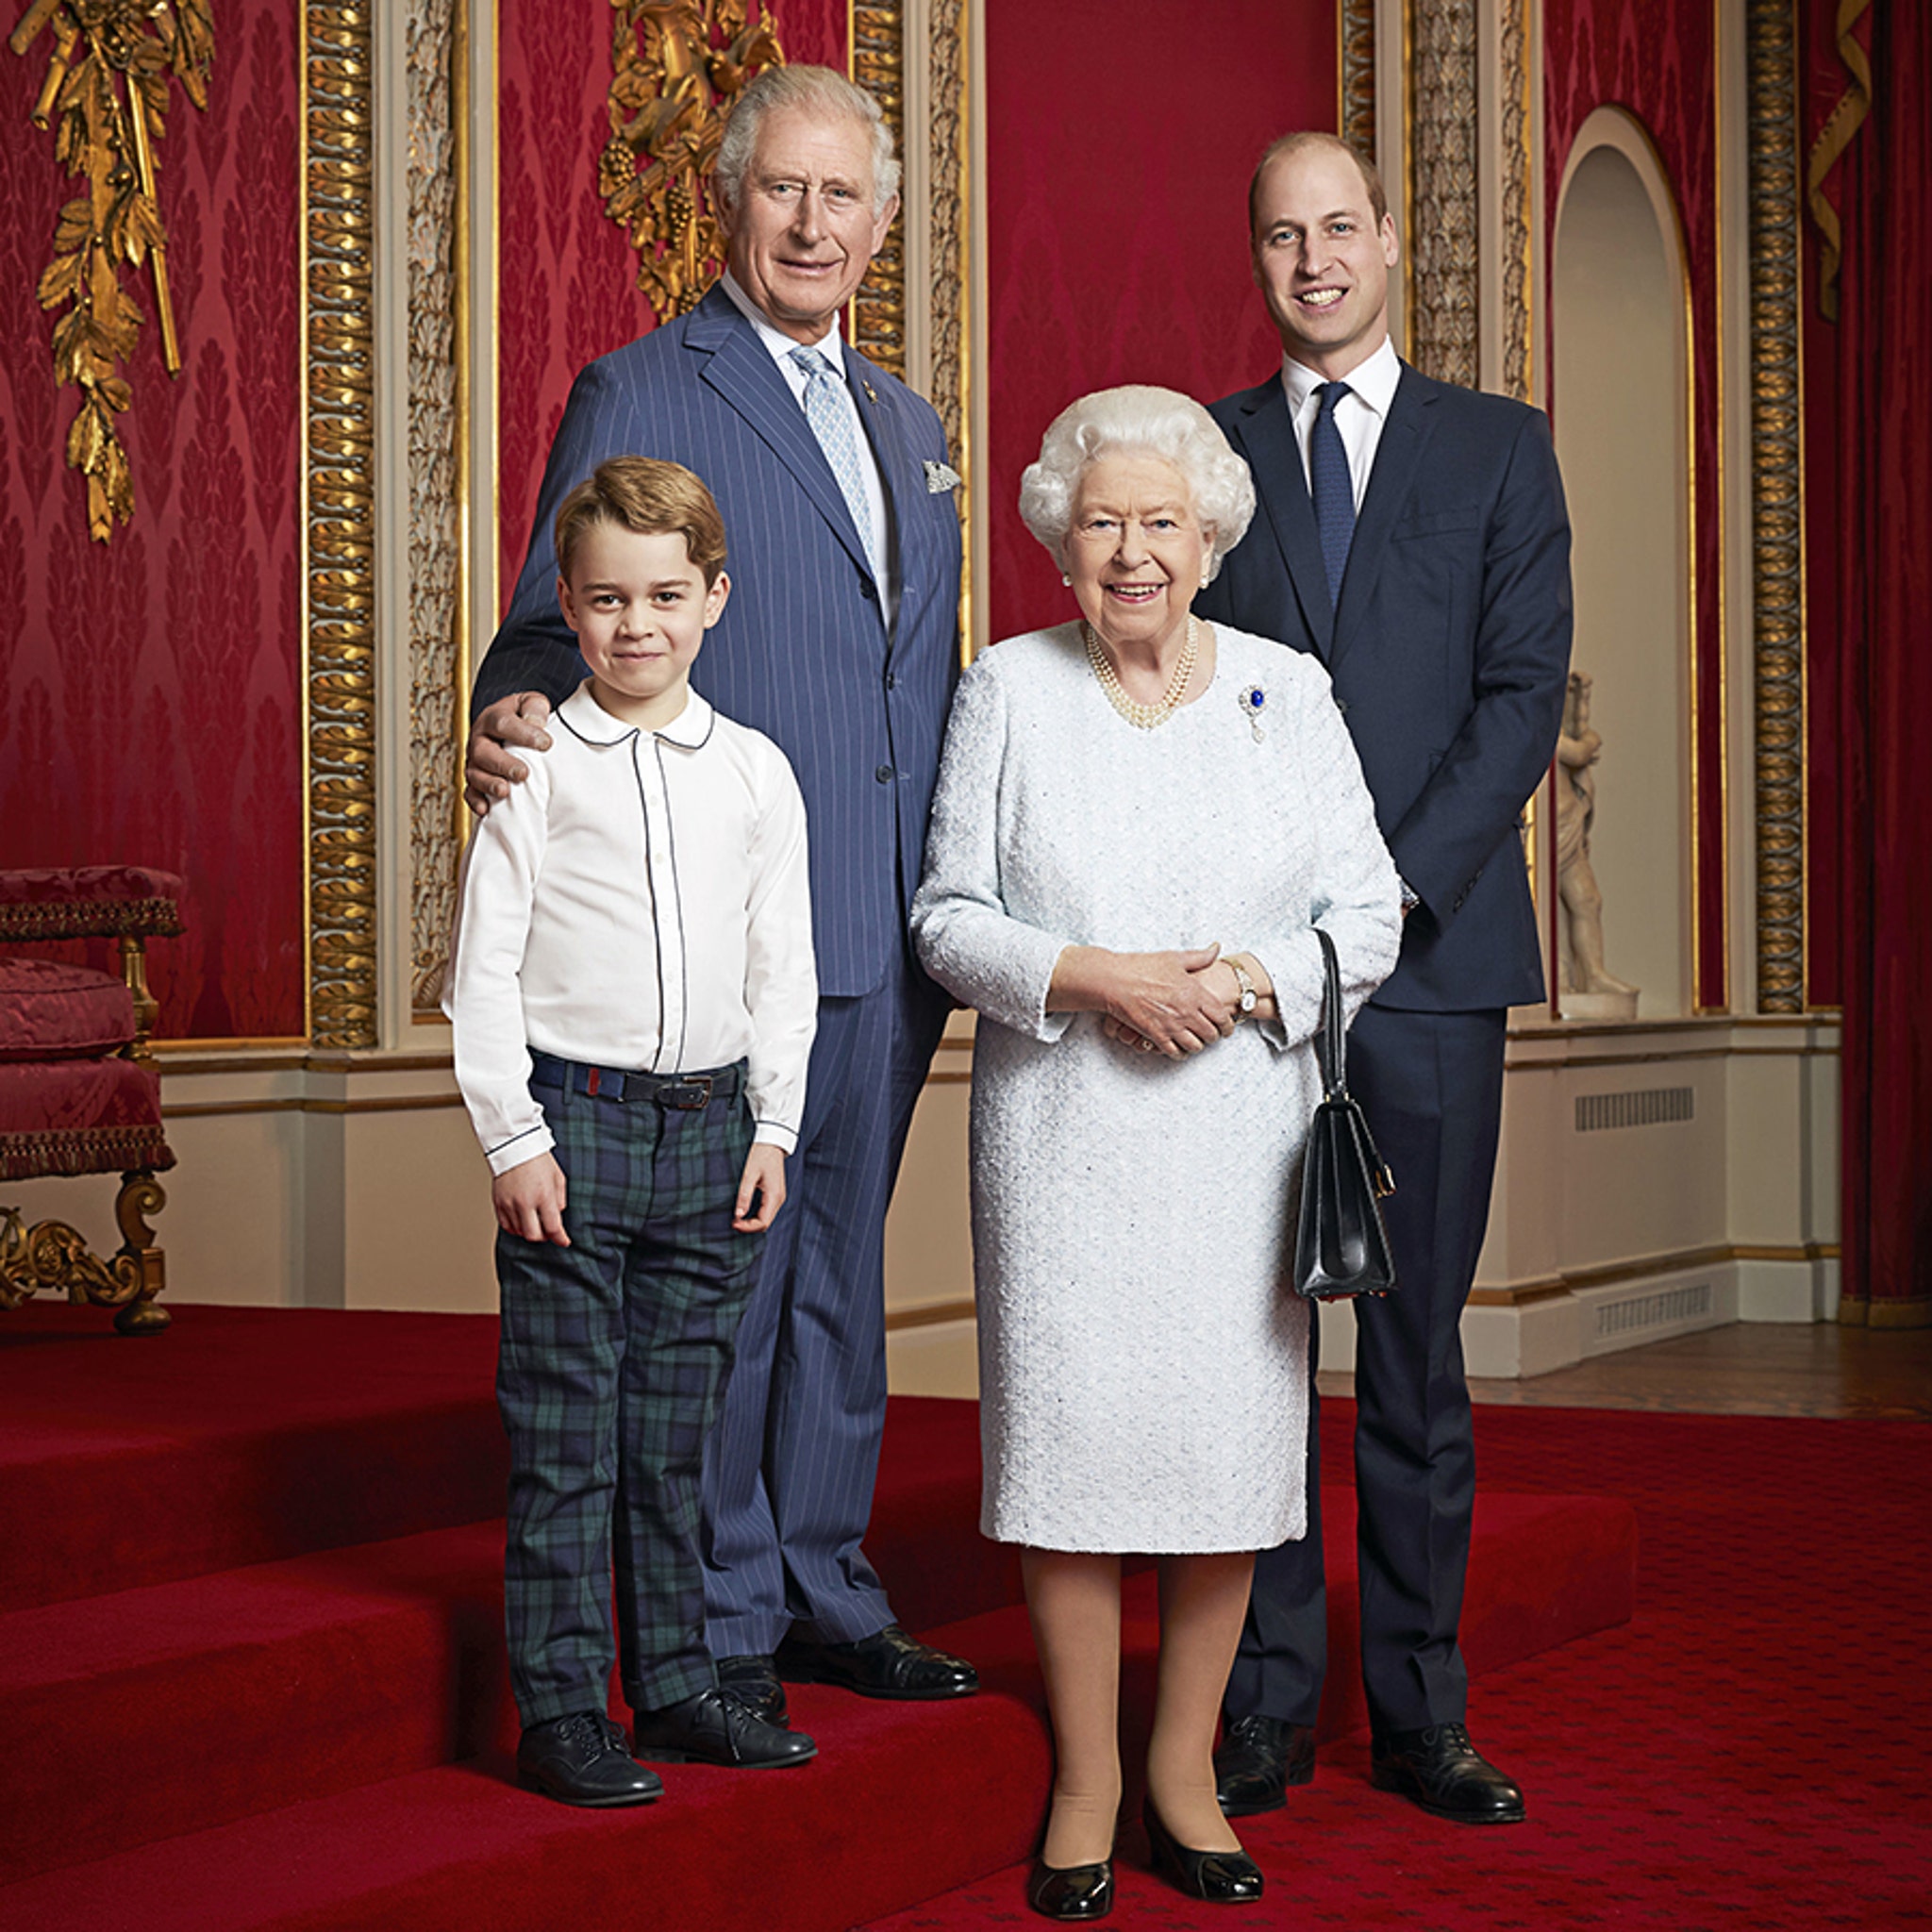 British Royal Family News, Articles, Stories & Trends for Today